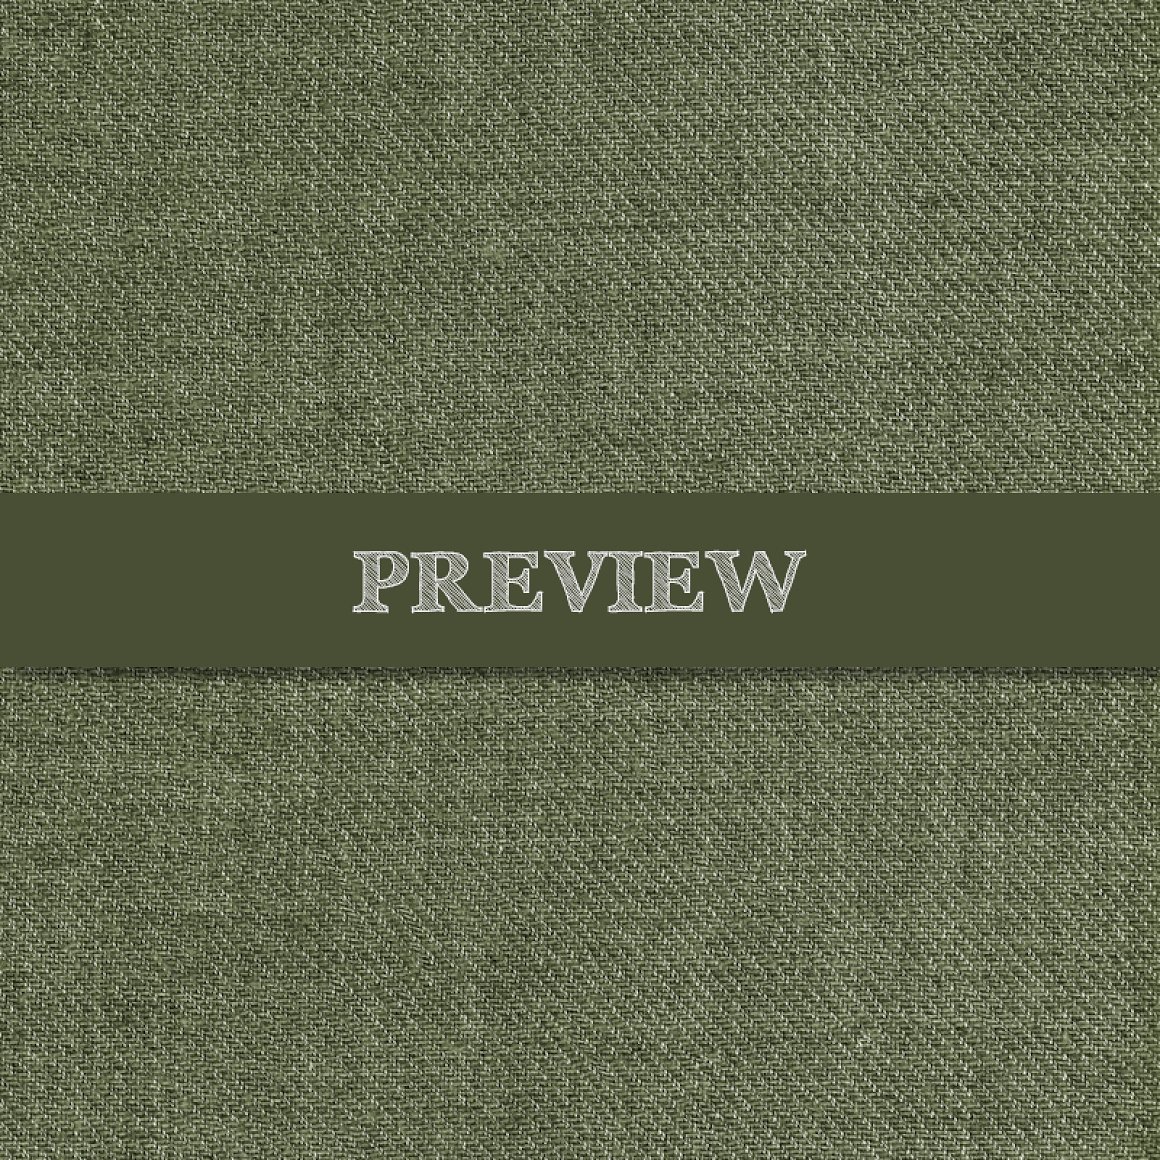 Fabric texture preview.